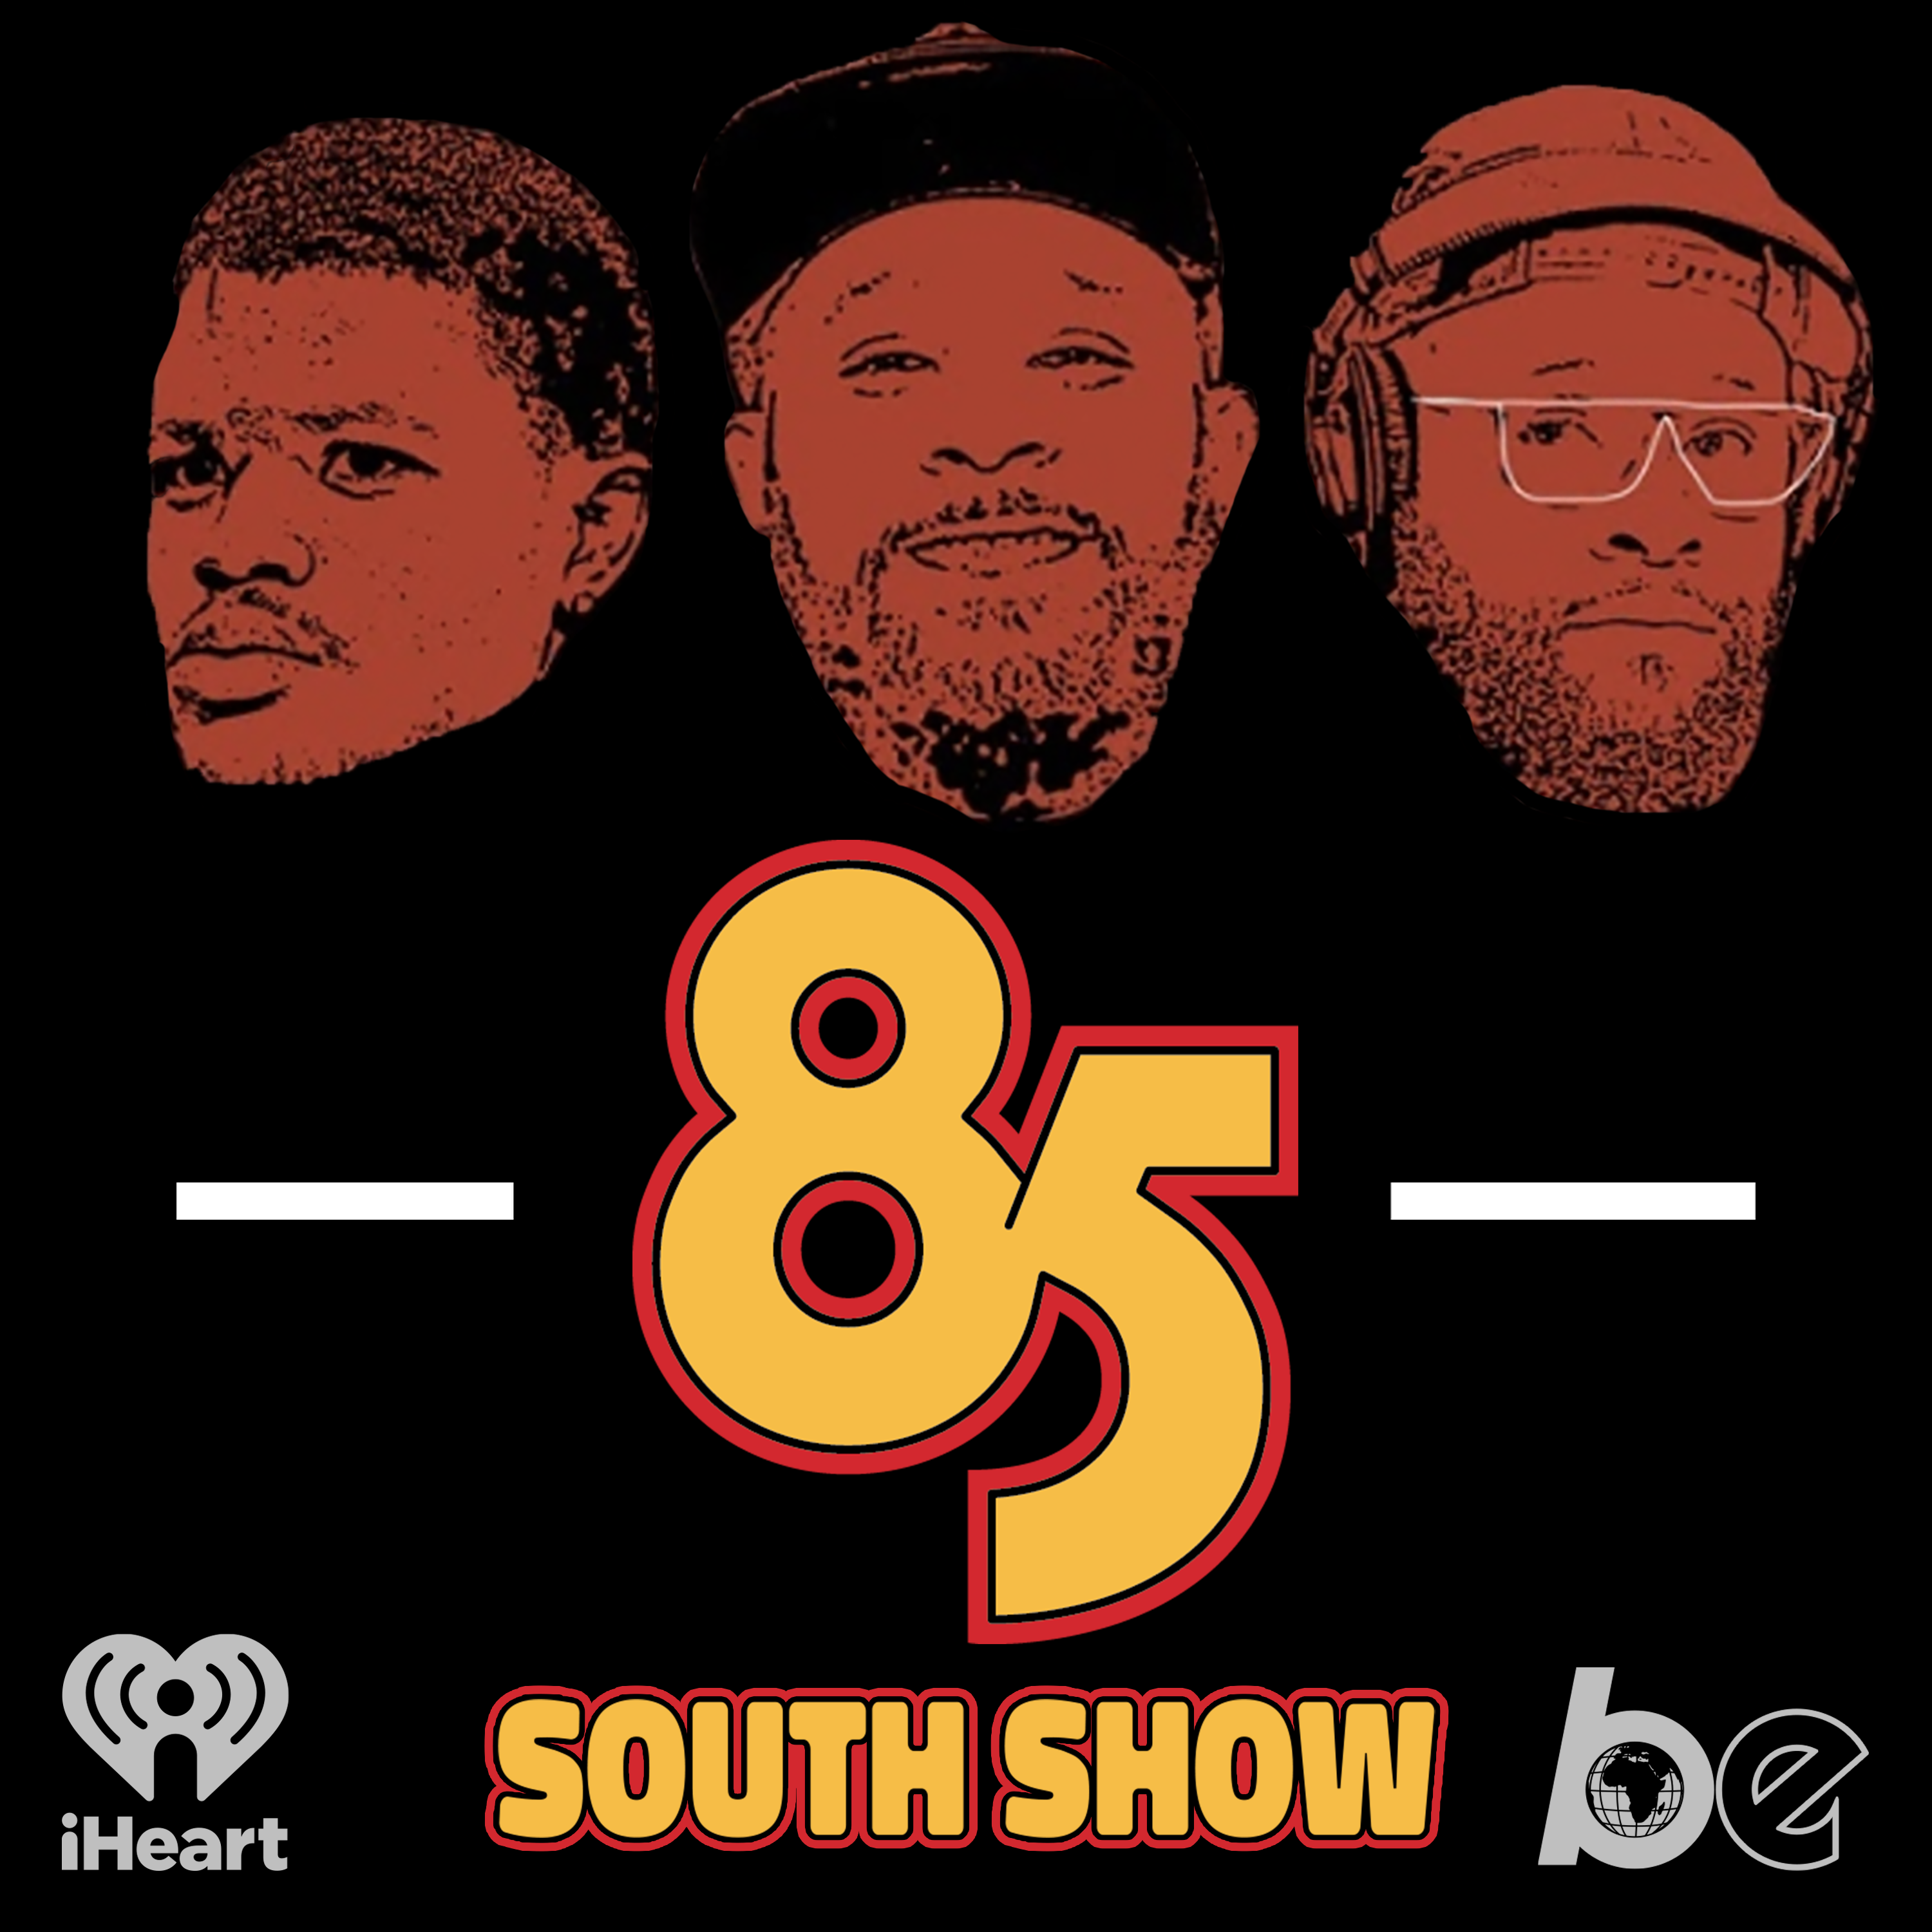 THE RAP BEEF | 85 South Show Podcast